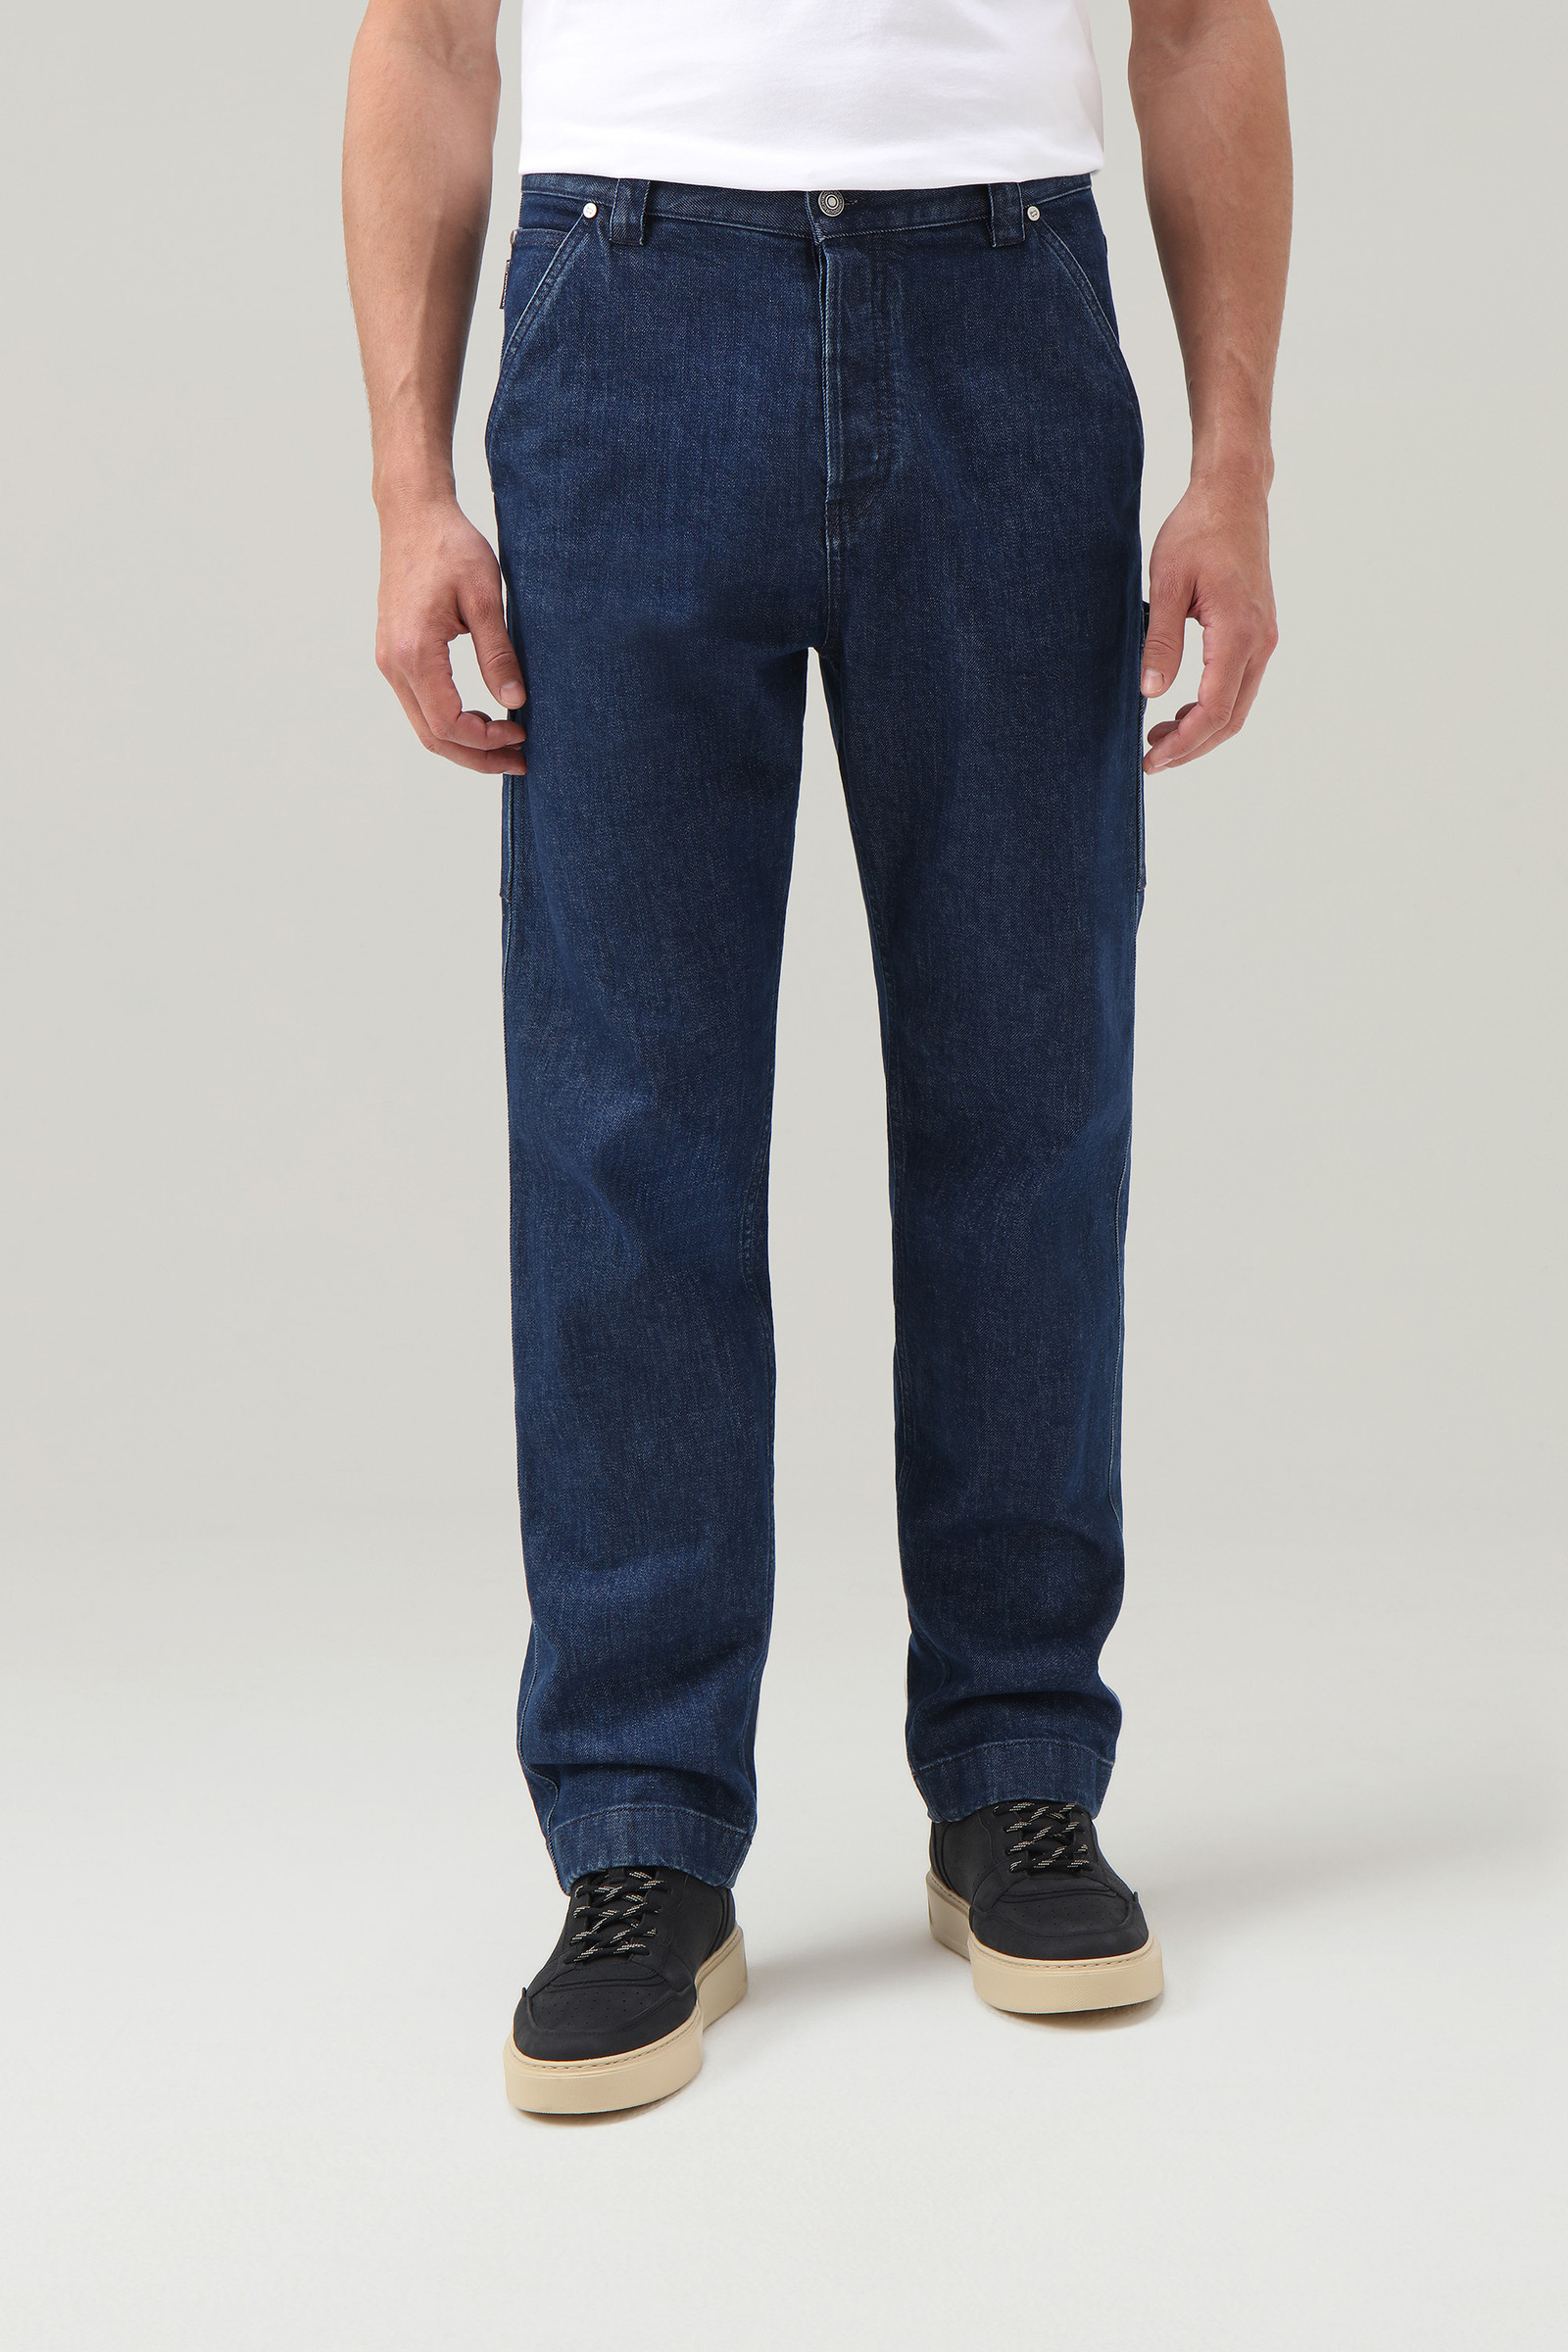 Worker Jeans in Cotton Blue | Woolrich USA